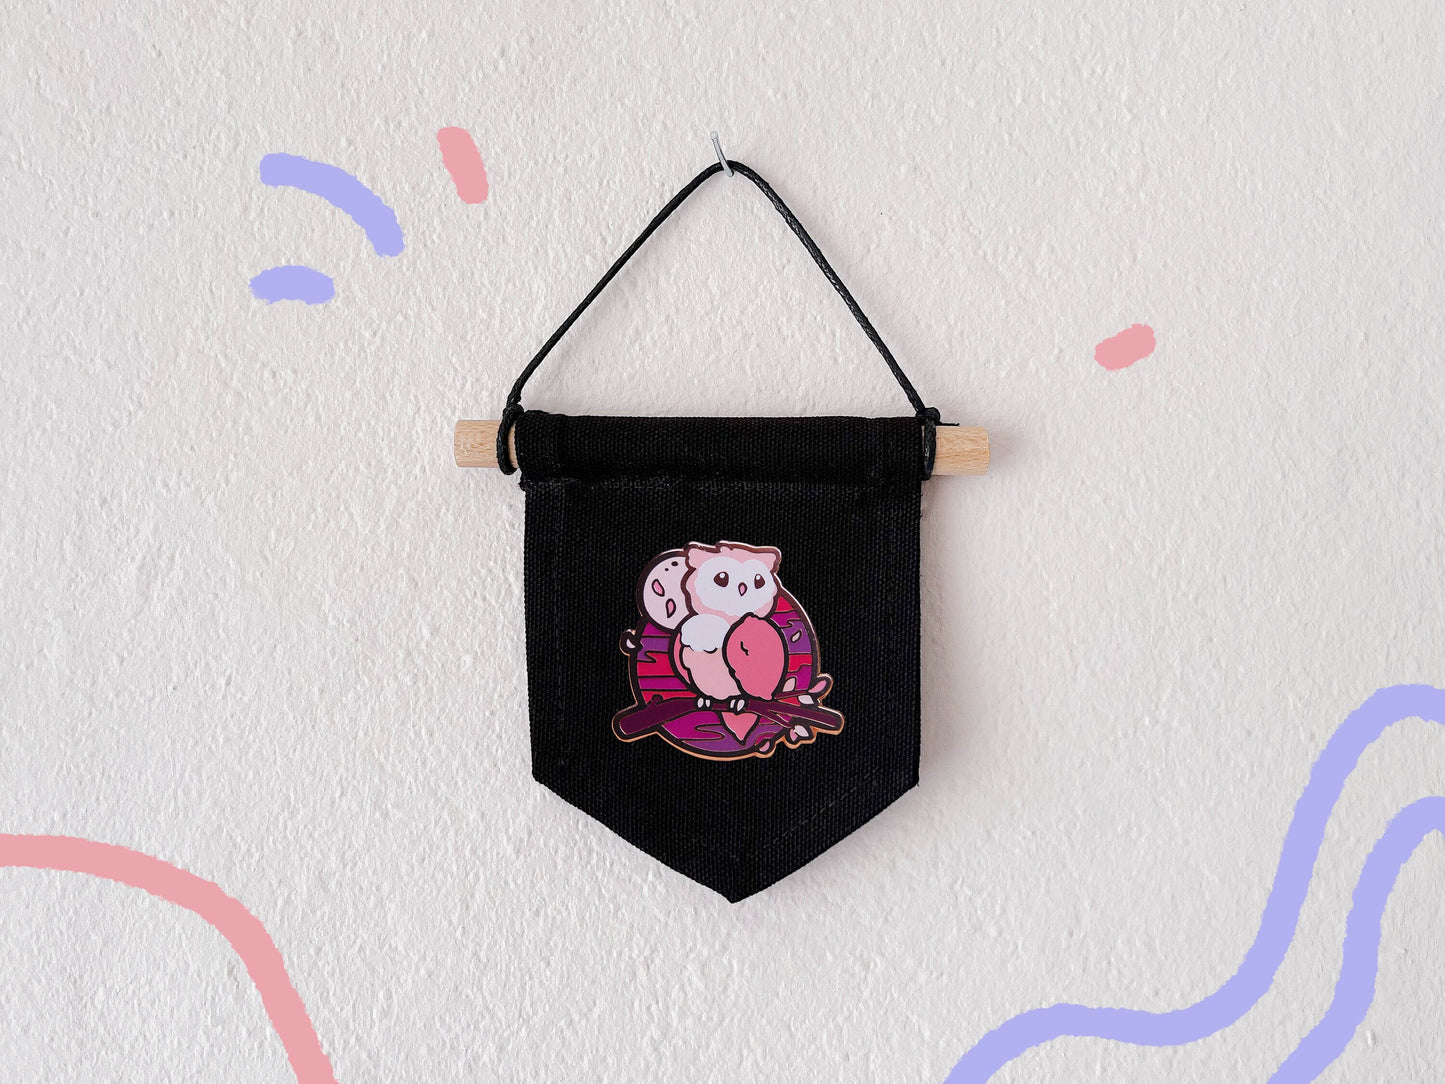 Cute Cotton Pin Banner | S 12cm x 10cm | Handmade in Germany | Black Canvas Fabric | Classic Pin Display